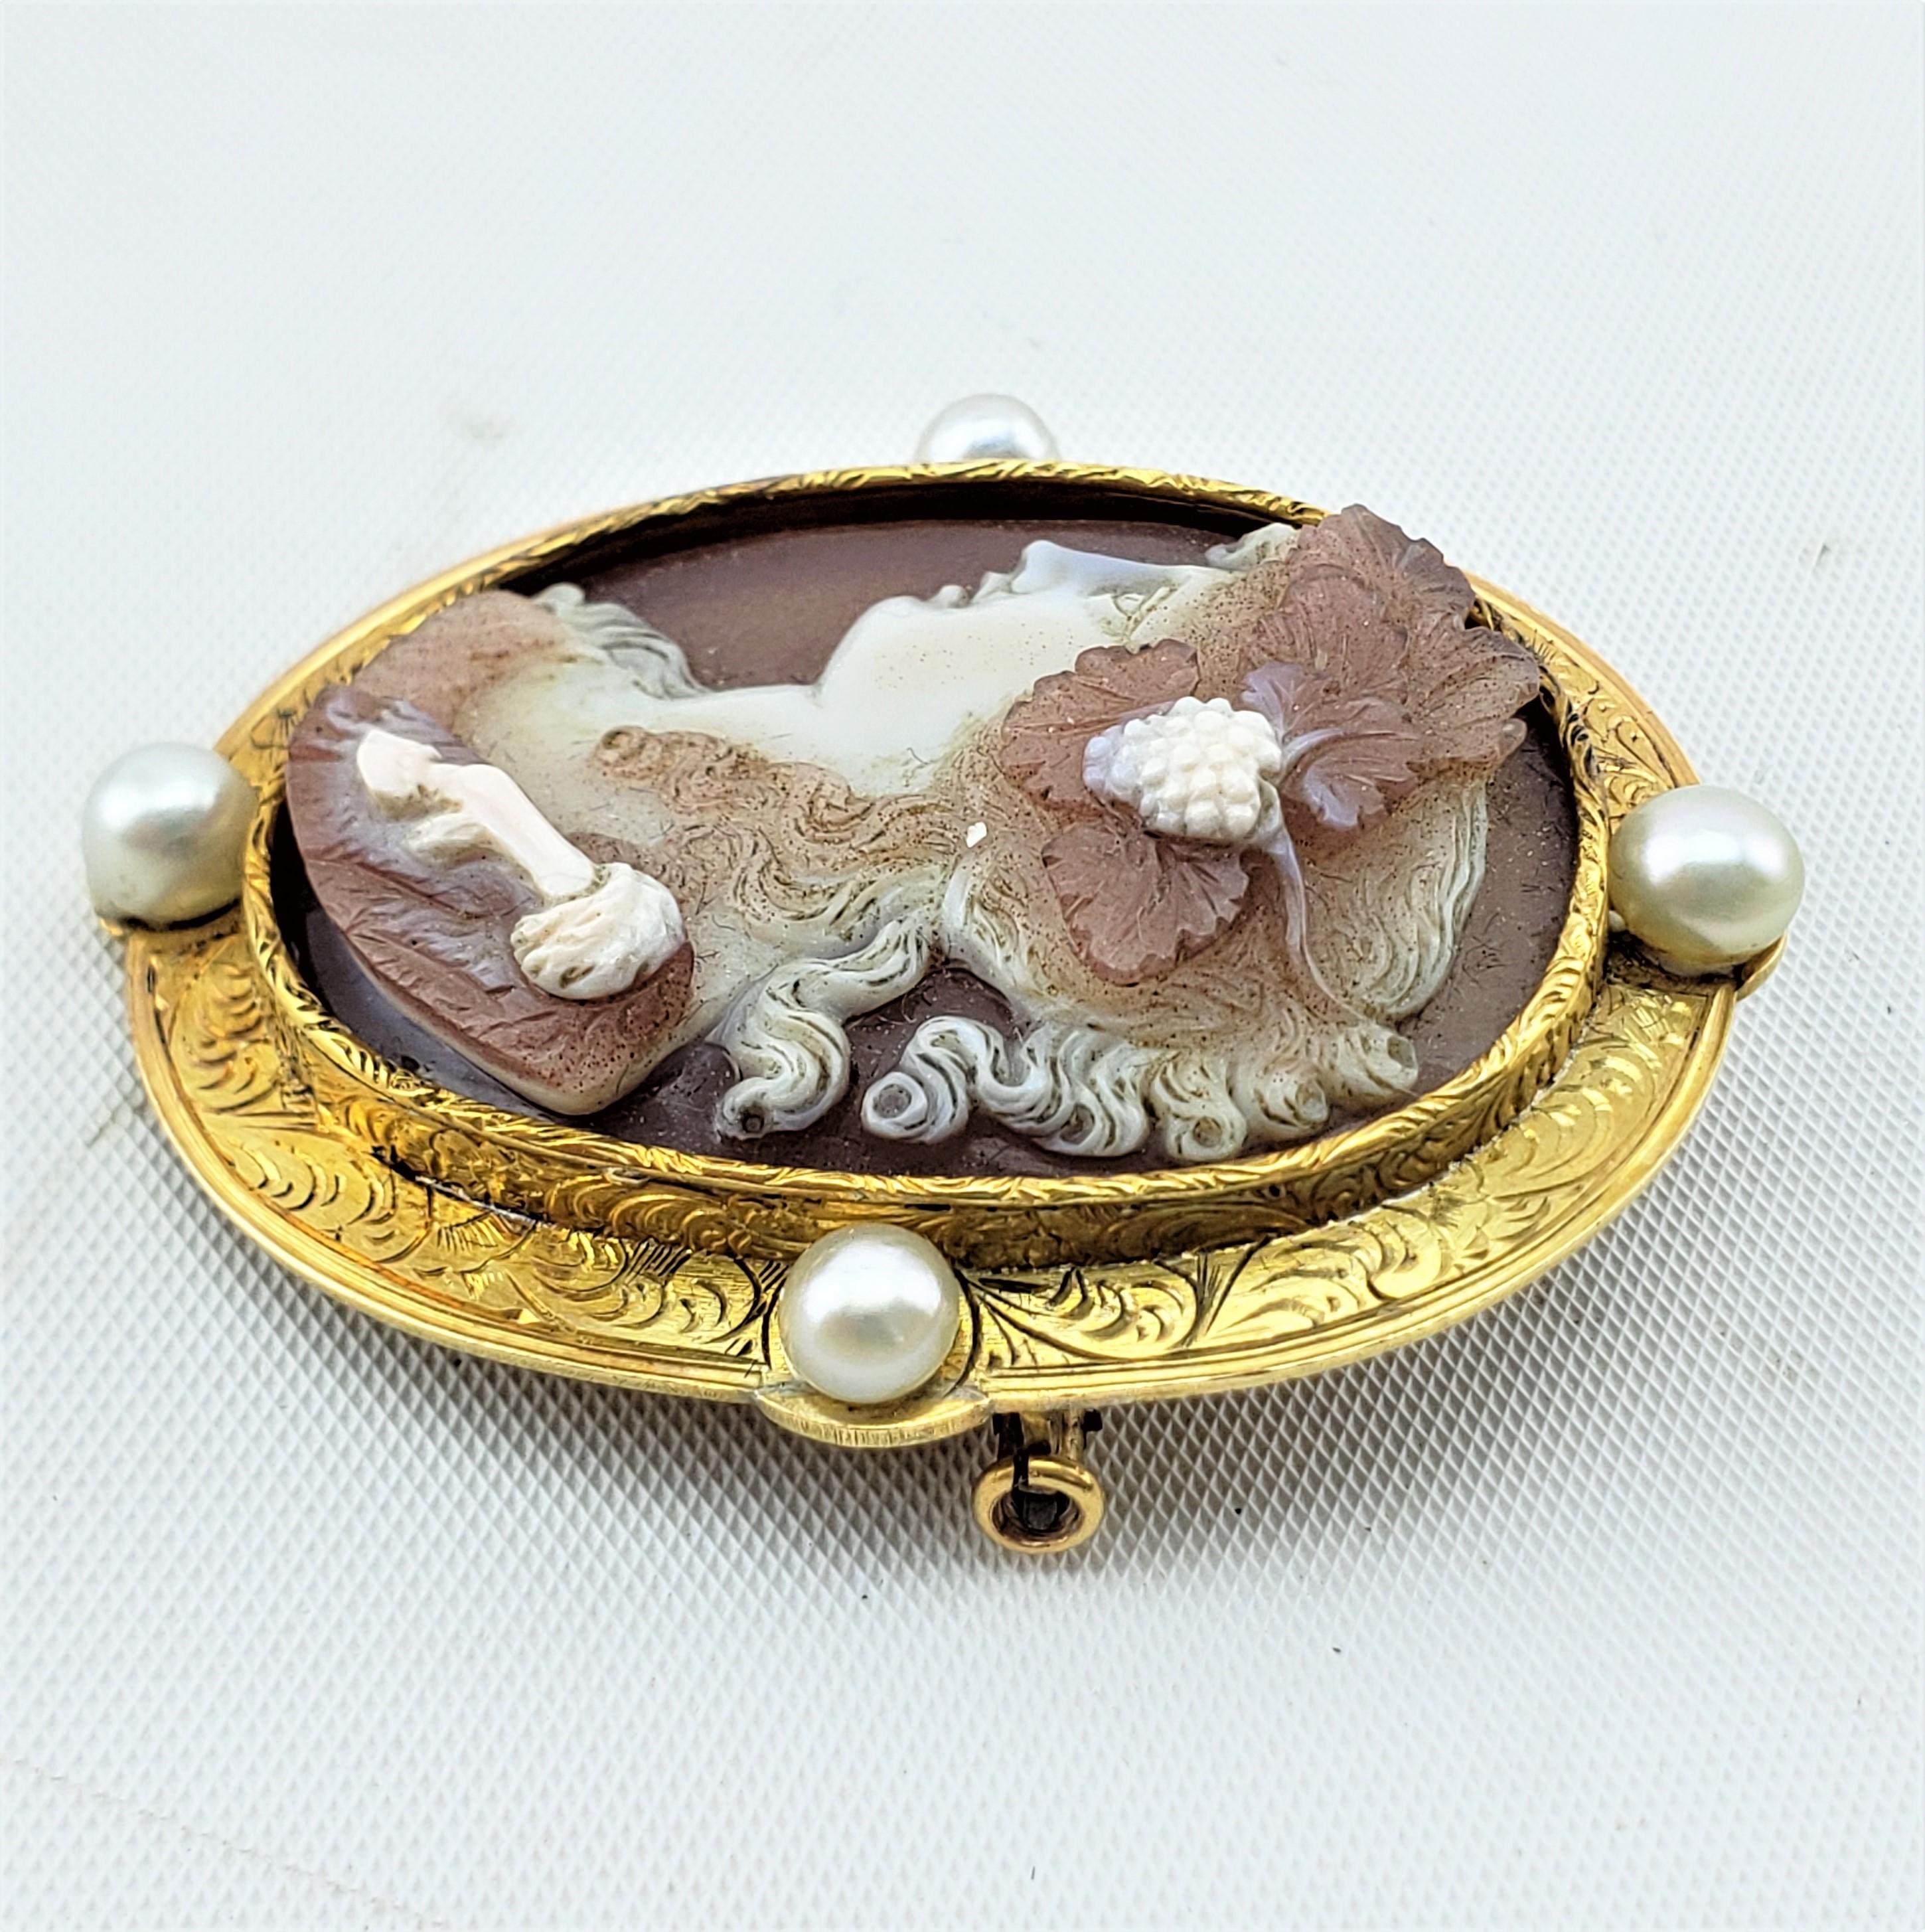 19th Century Antique 18 Karat Engraved Yellow Gold & Hand-Carved Hardstone Cameo Brooch